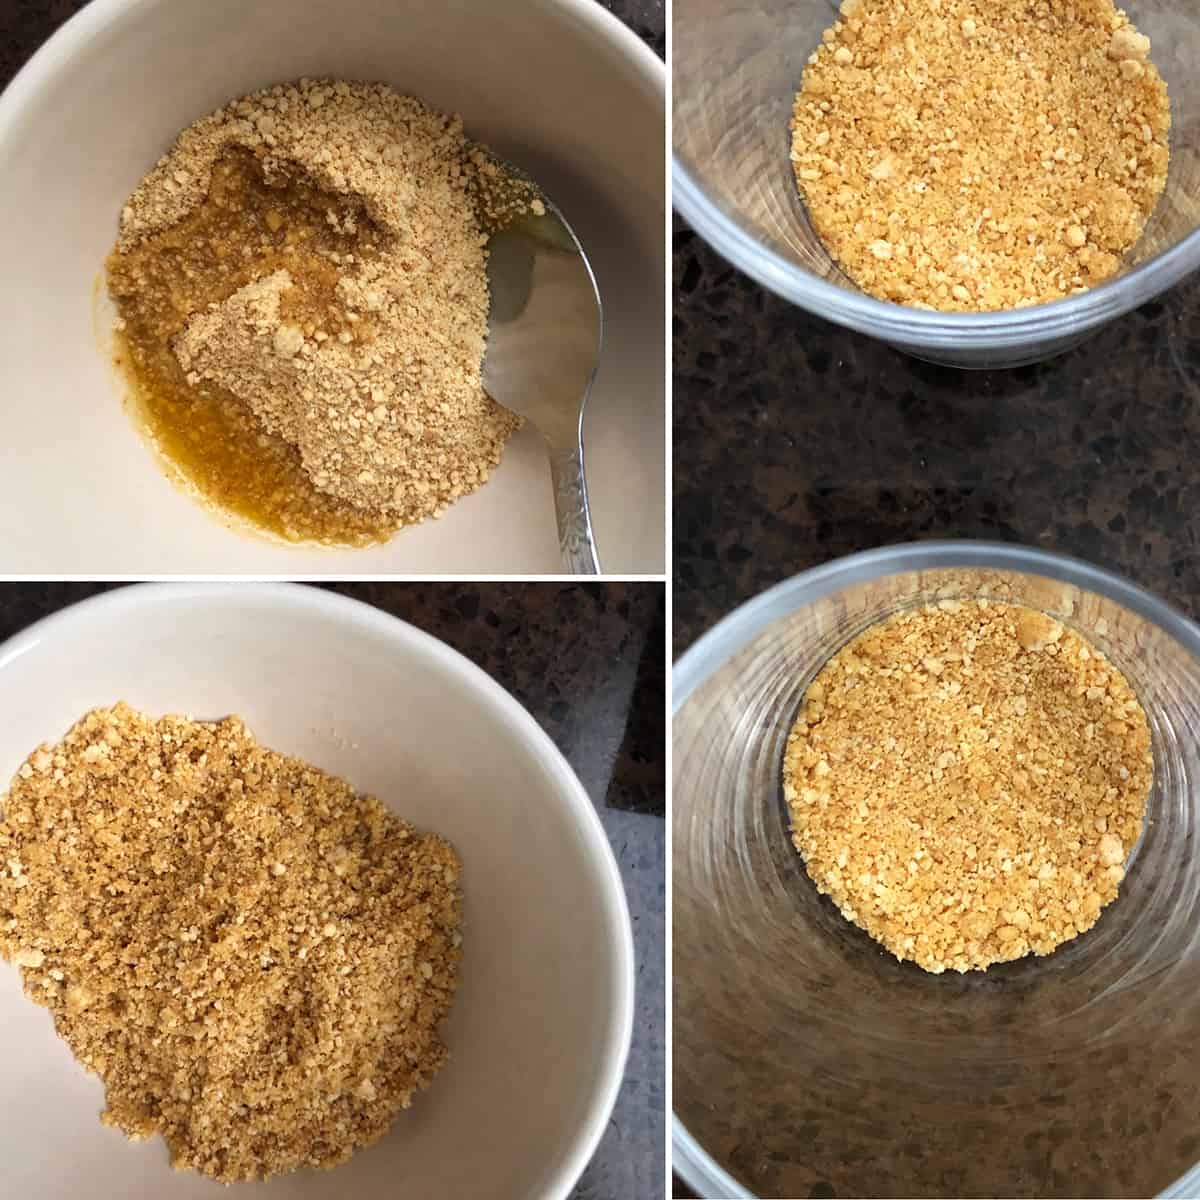 Melted ghee added to graham cracker crumbs. added to glasses to form the crust.